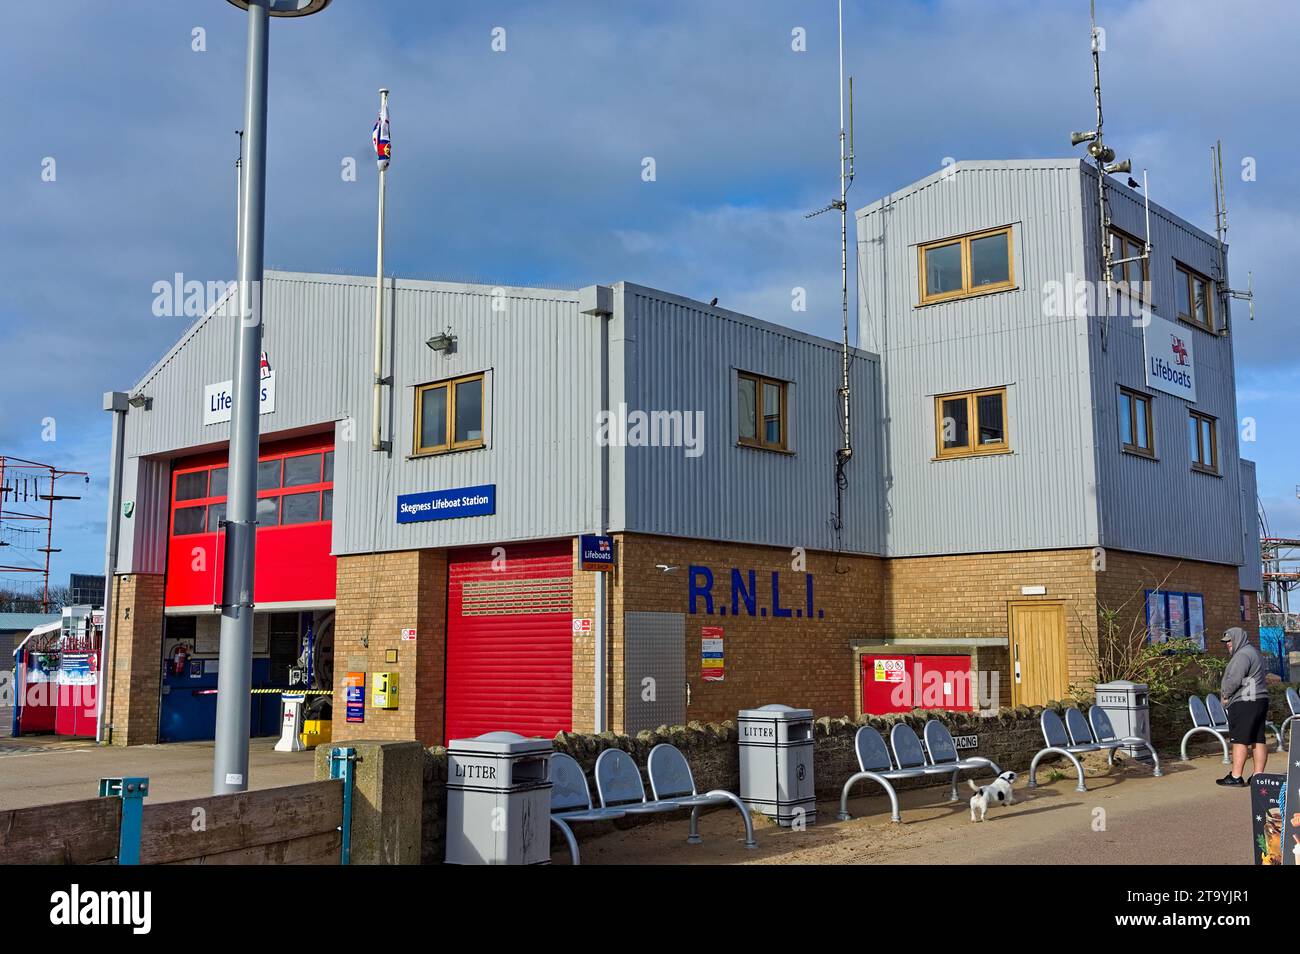 The RNLI boat station on the seafront promenade in Skegness Stock Photo